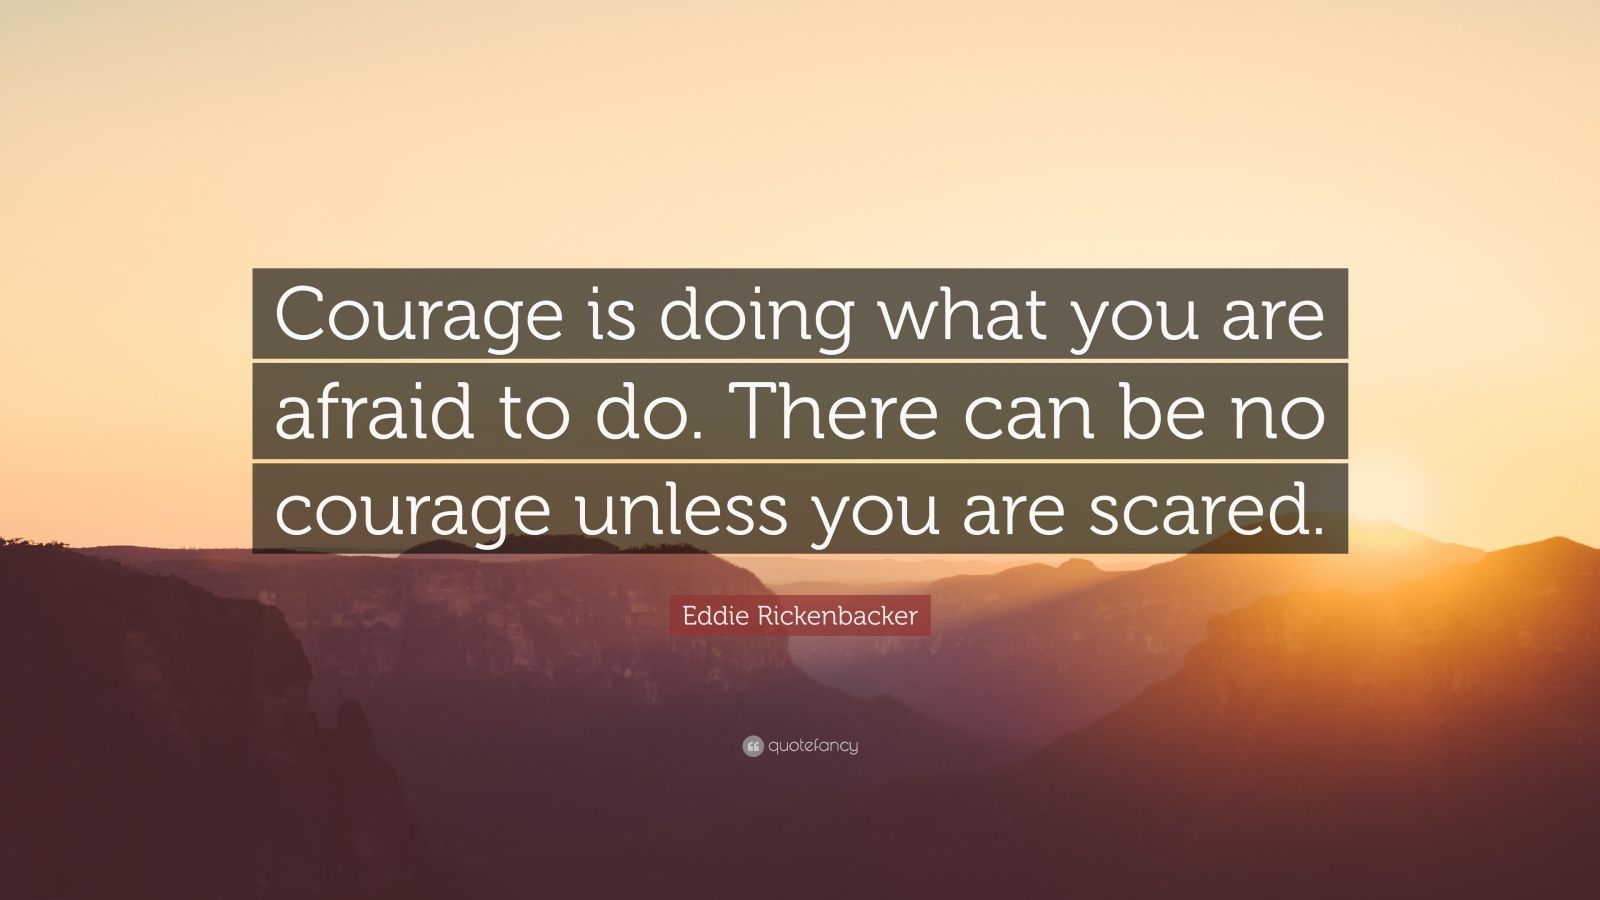 Eddie Rickenbacker Quote: “Courage is doing what you are afraid to do ...